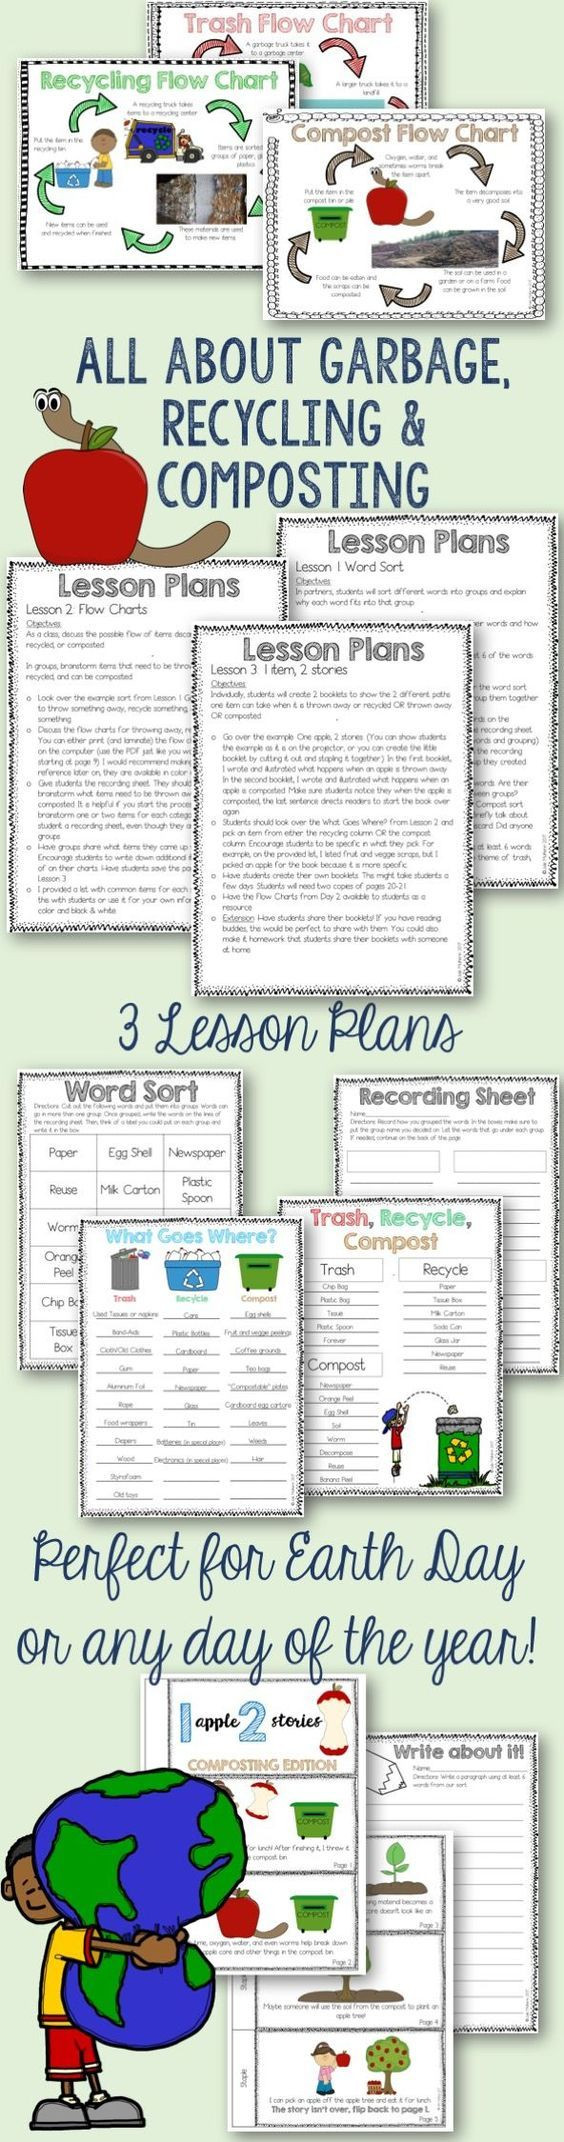 Recycling Lesson Plan Garbage Recycle or Post Lesson Plans with Images